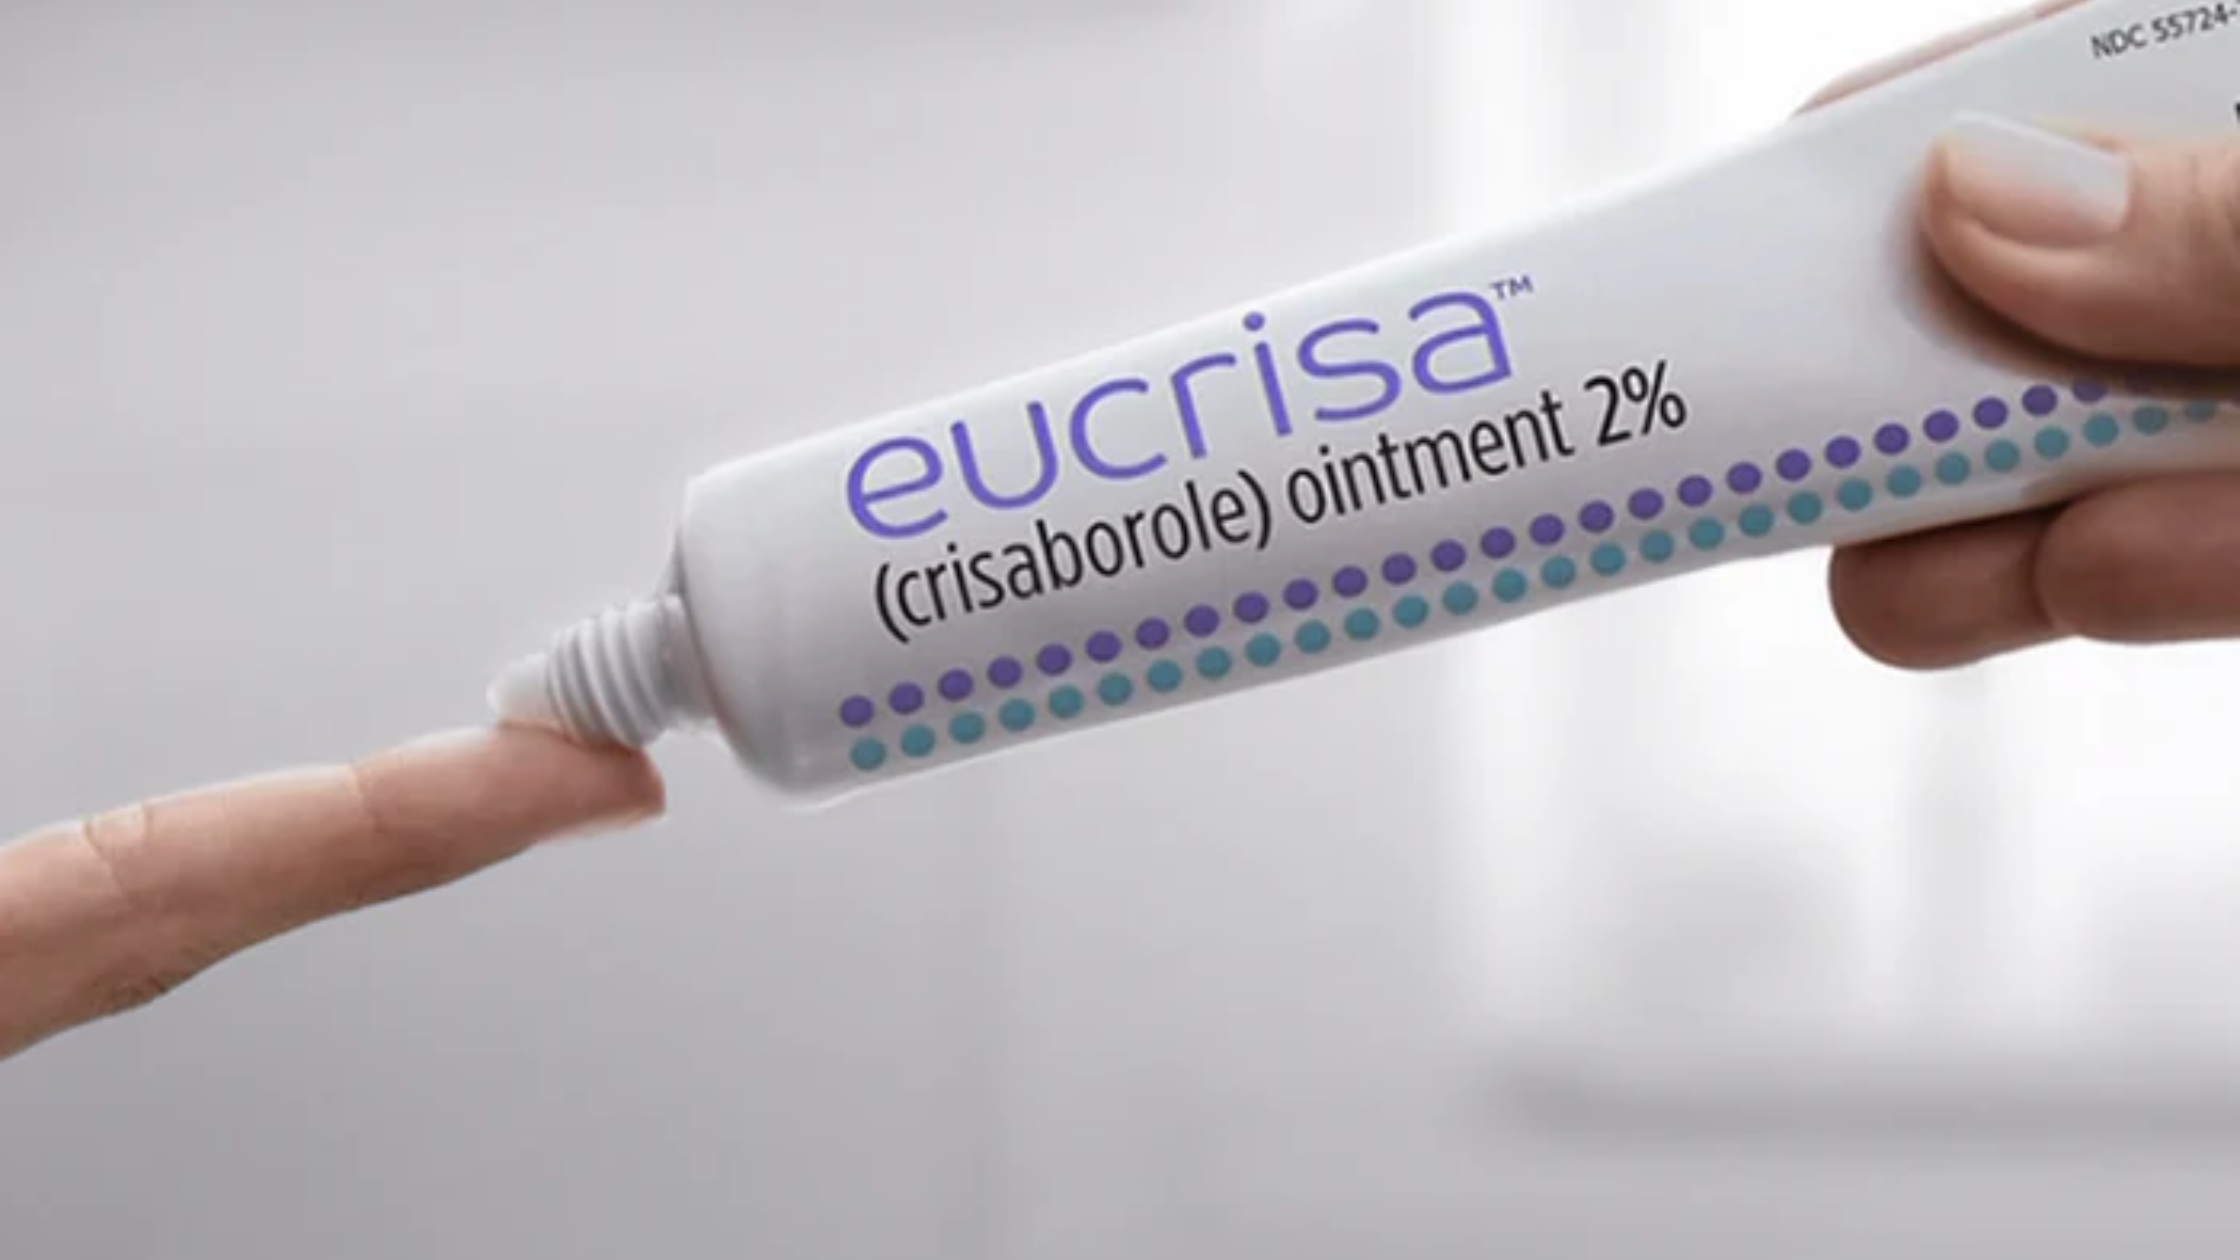 A New Eczema Treatment: What You Need to Know About Eucrisa